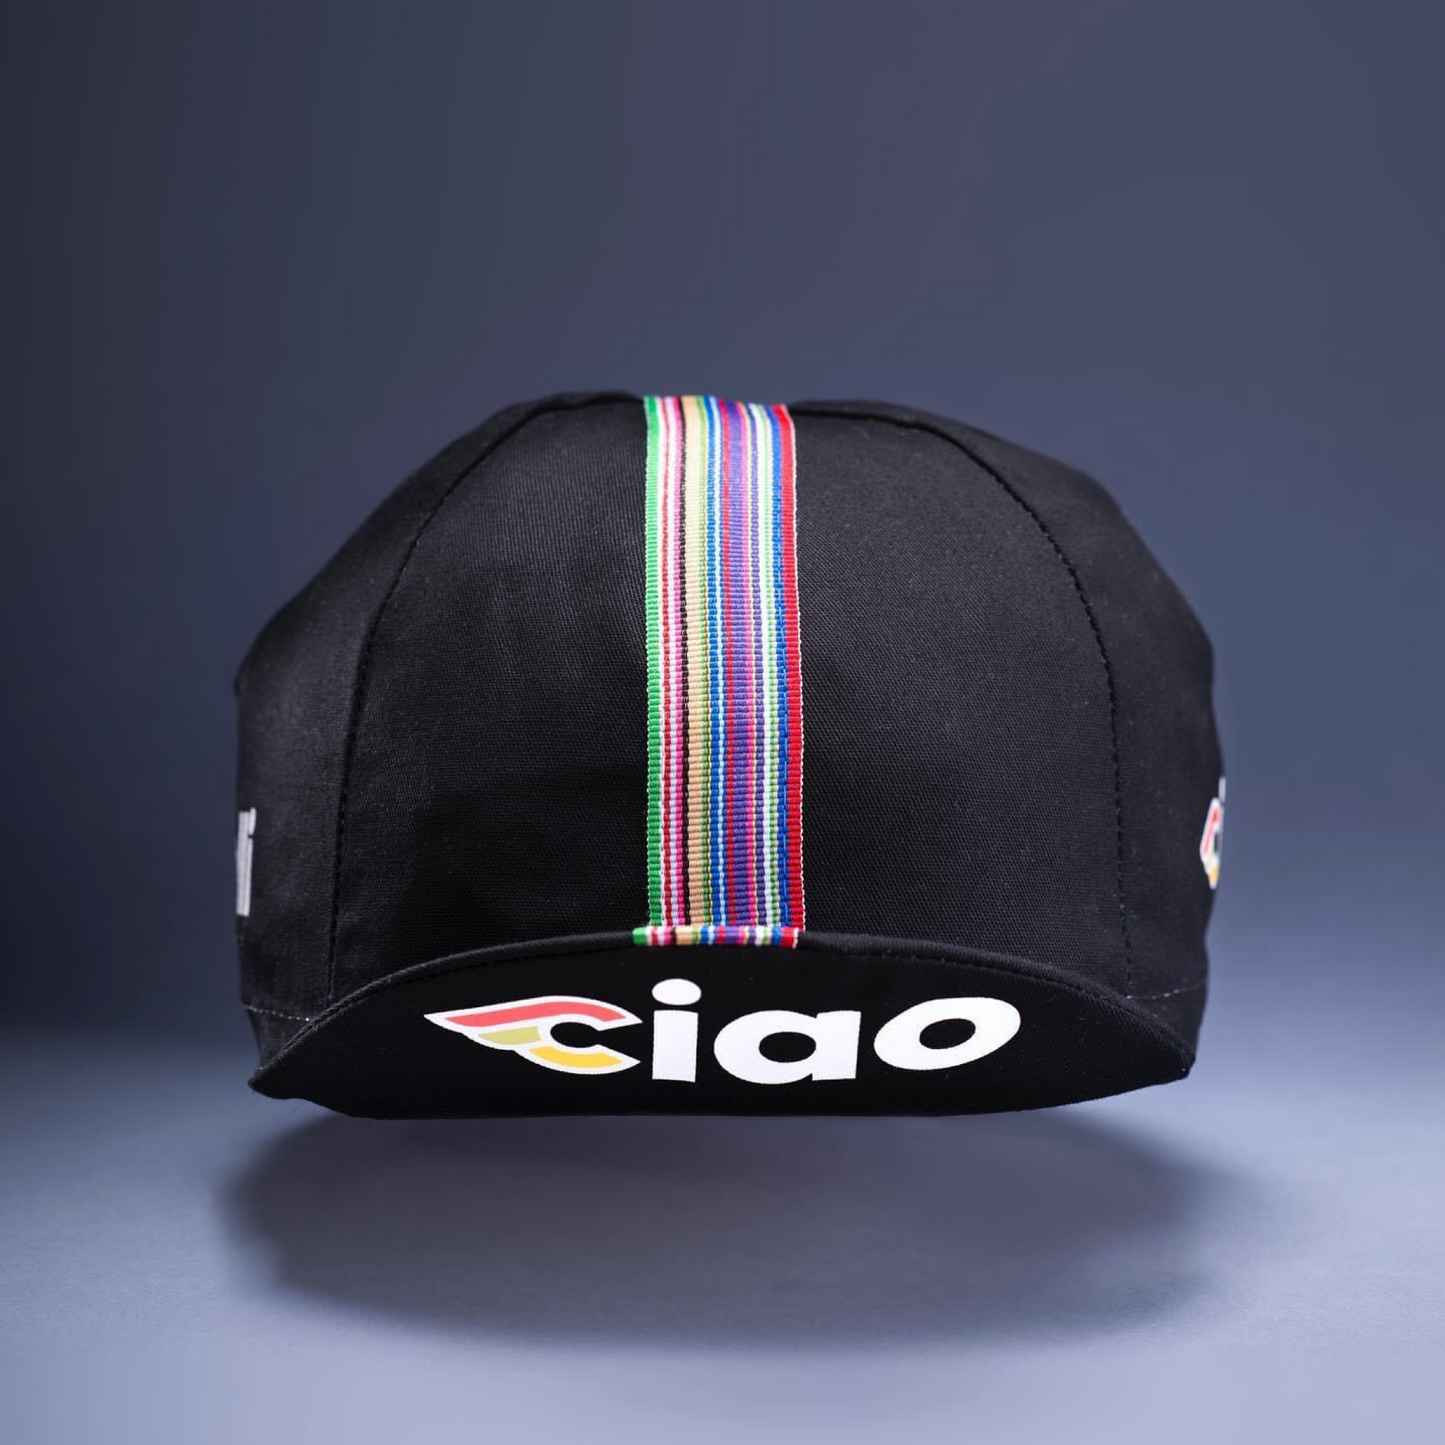 Cinelli Ciao Black Cap by Ascender Cycling Club Switzerland Front View